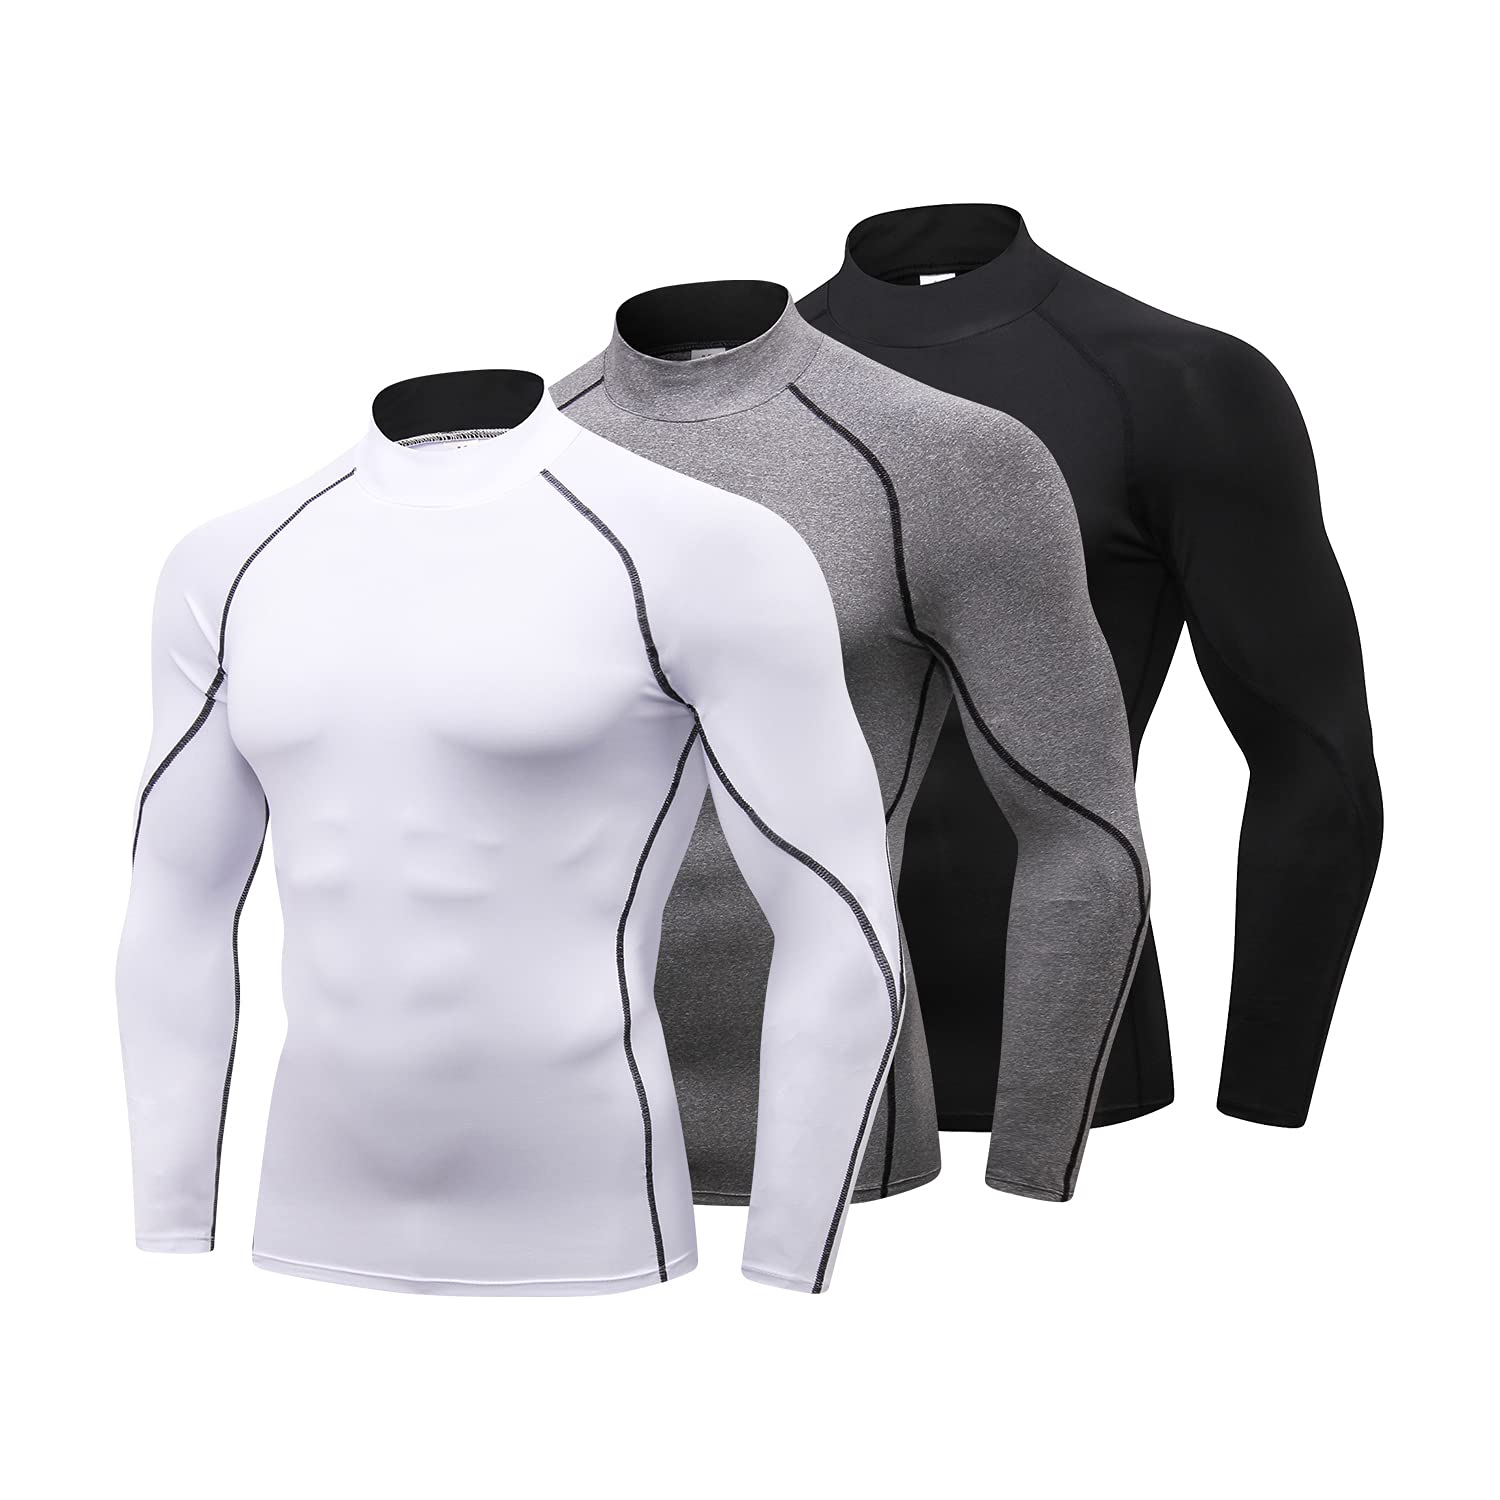 Clearance Men's Thermal Long Sleeve Compression Shirts Turtleneck